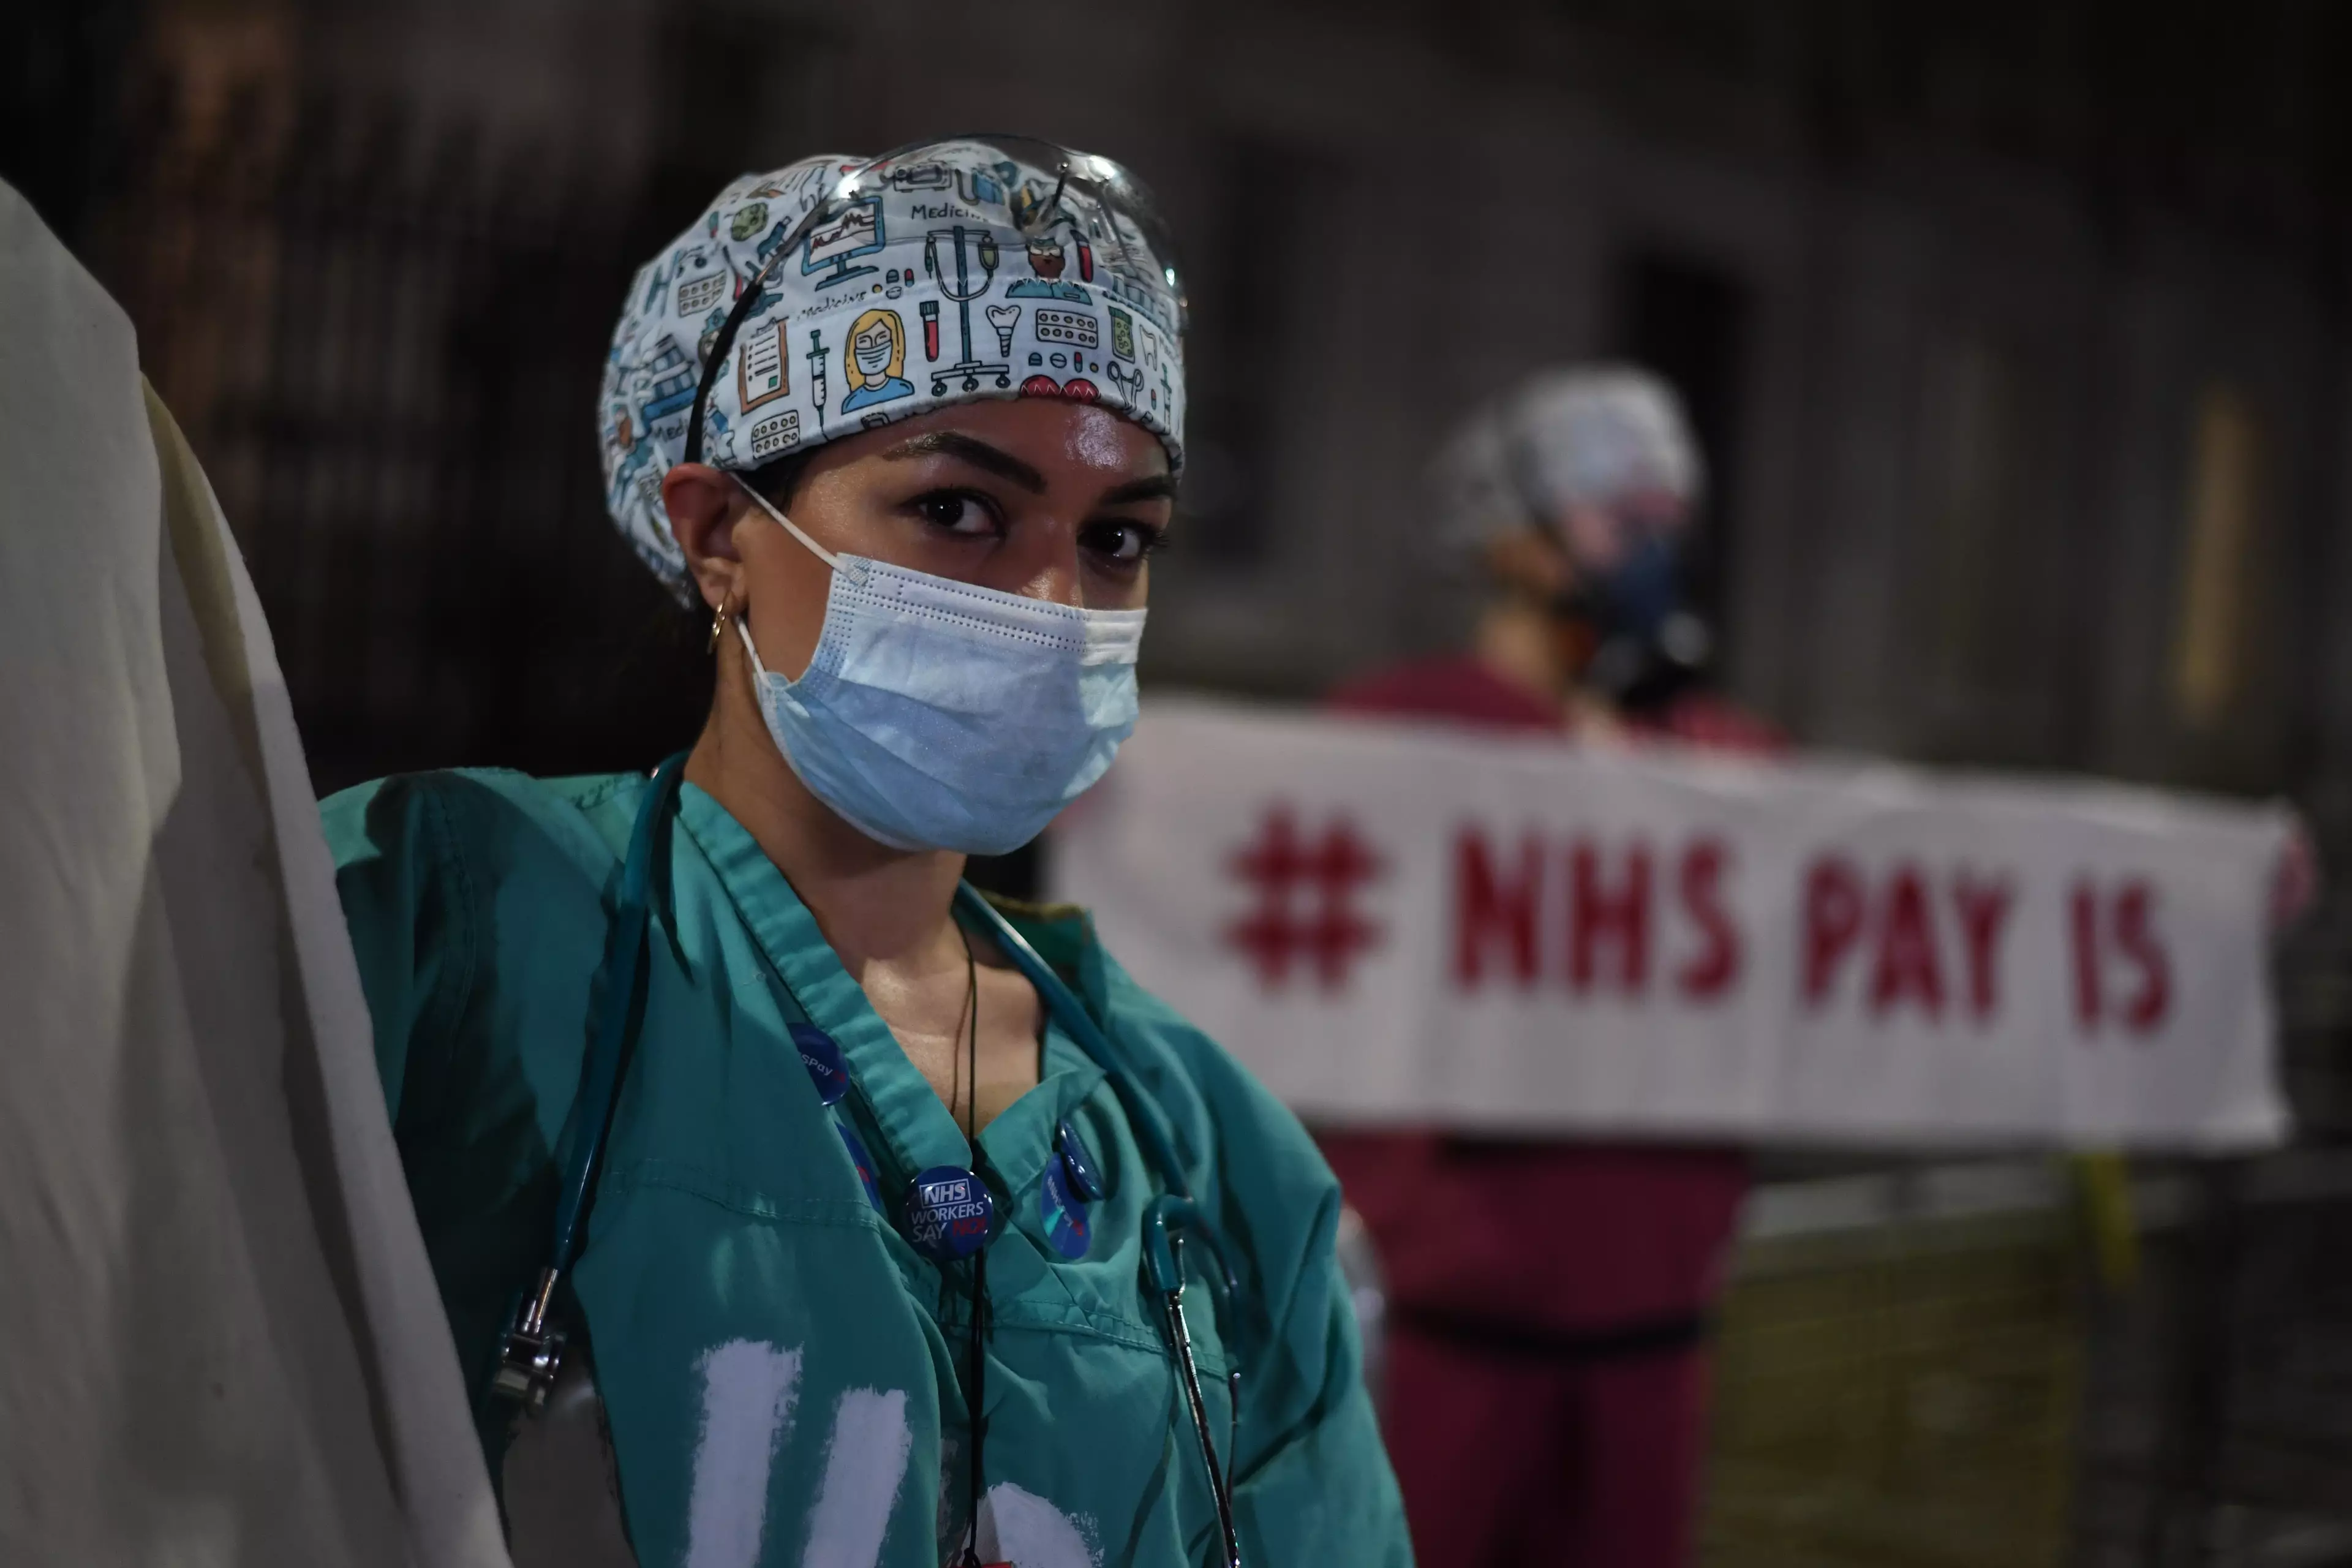 NHS staff called for Boris Johnson to go.